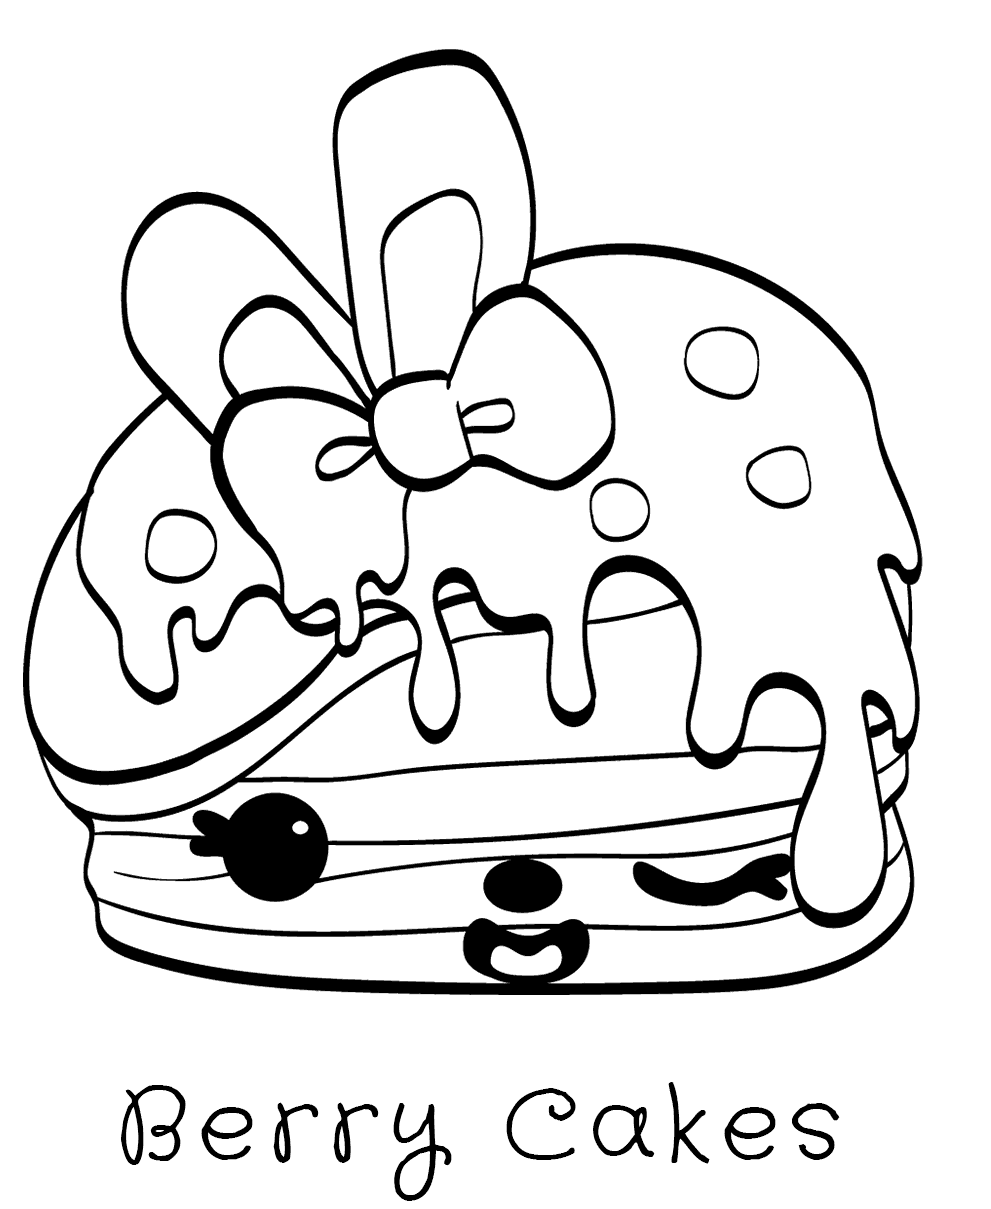 Berry Cakes Coloring Page